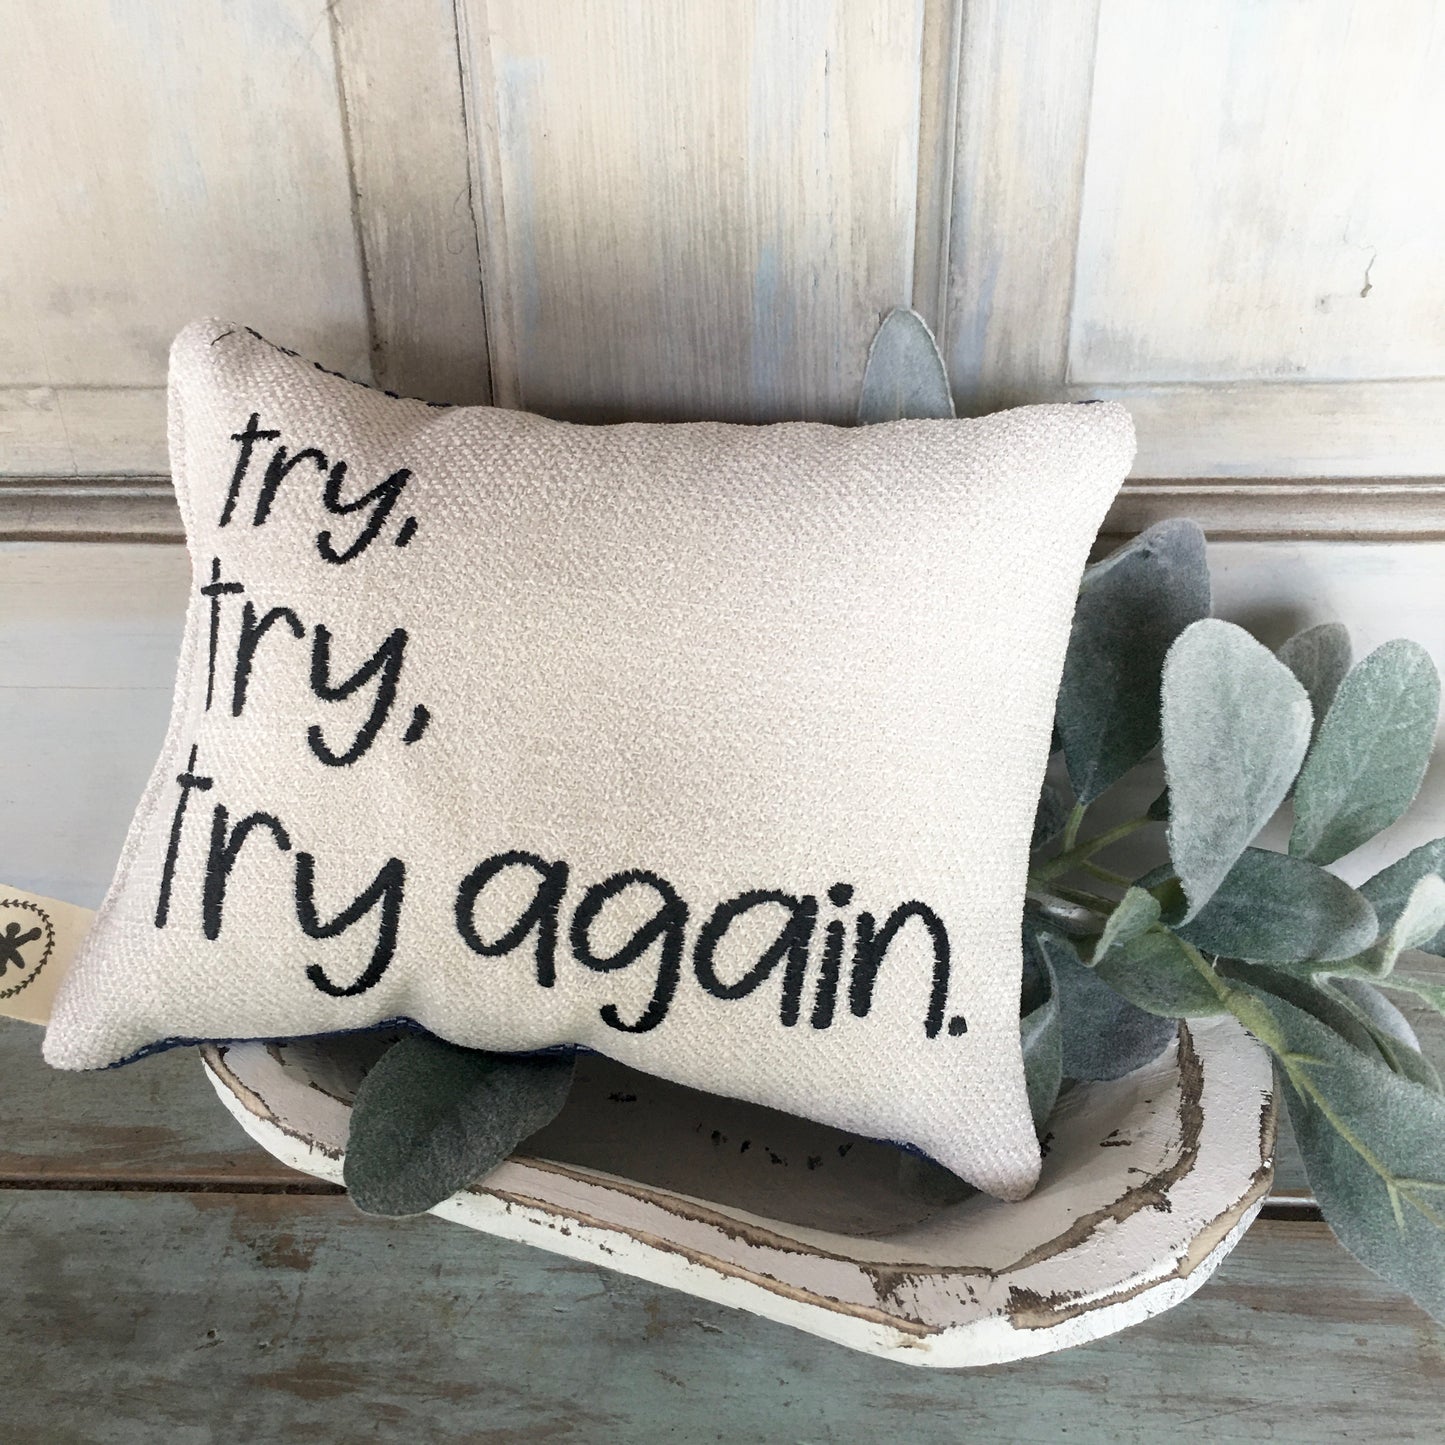 Try, Try, Try Again  Message Pillow